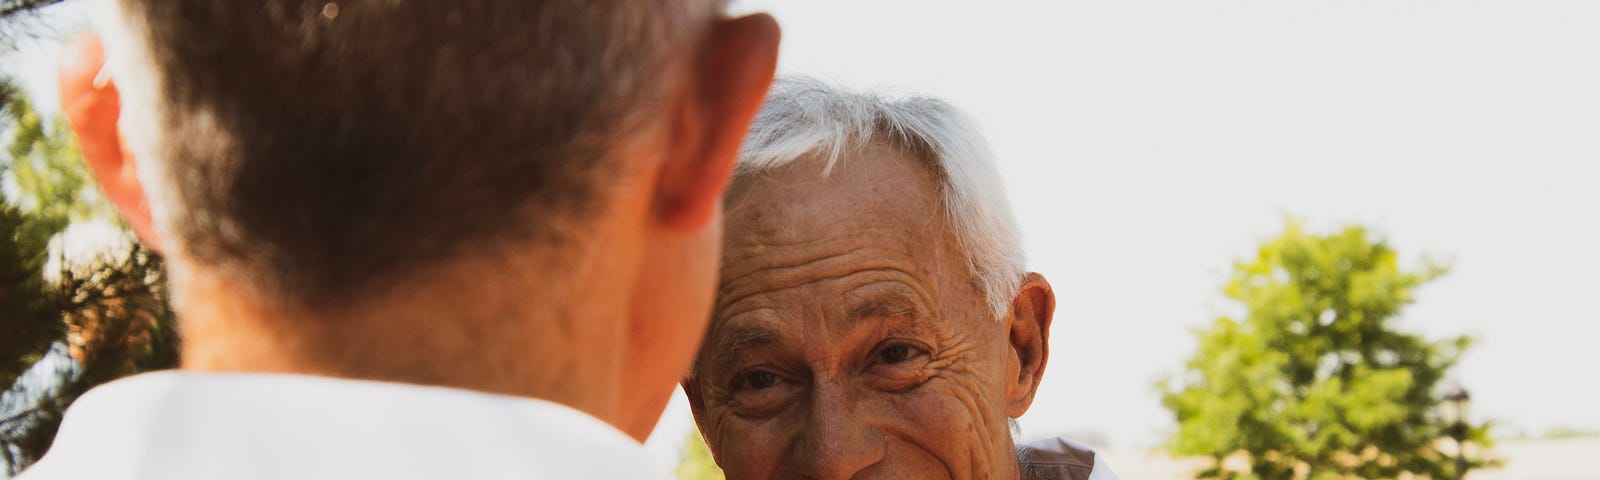 Younger man in foreground conversing with laughing older man